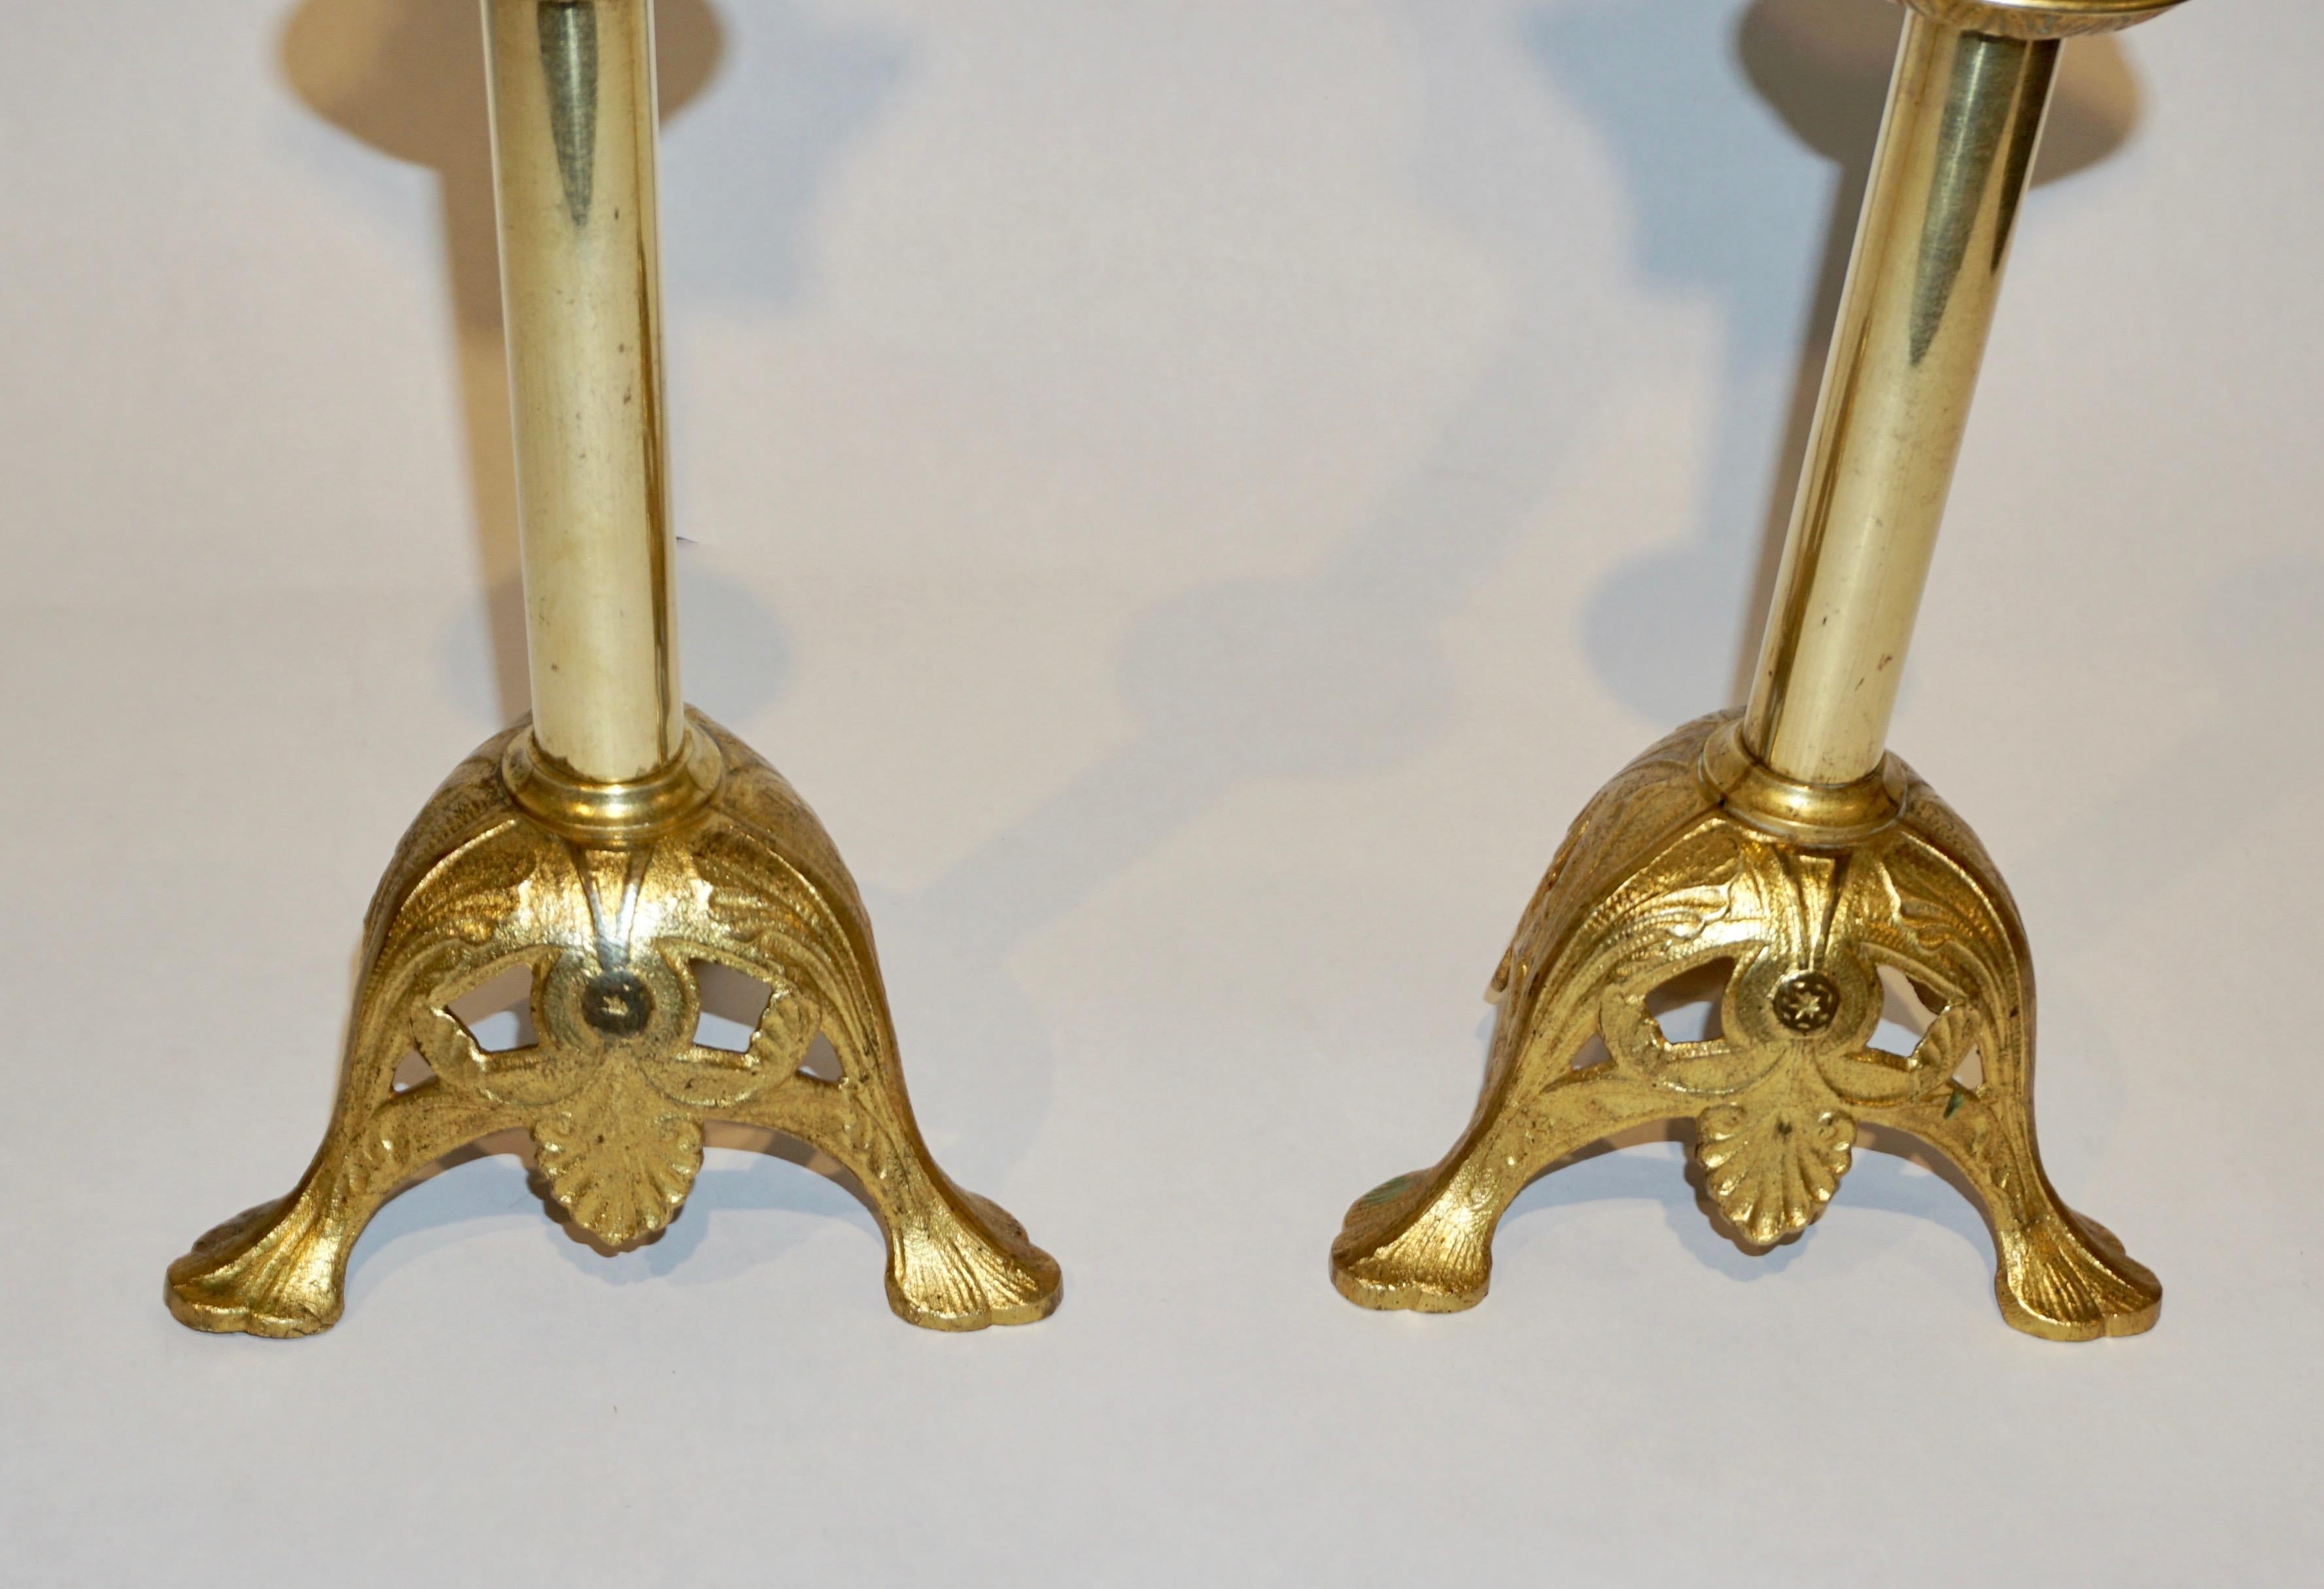 1880s French Baroque Revival Pair of Gilt Bronze Ormolu Pricket Candlesticks For Sale 1